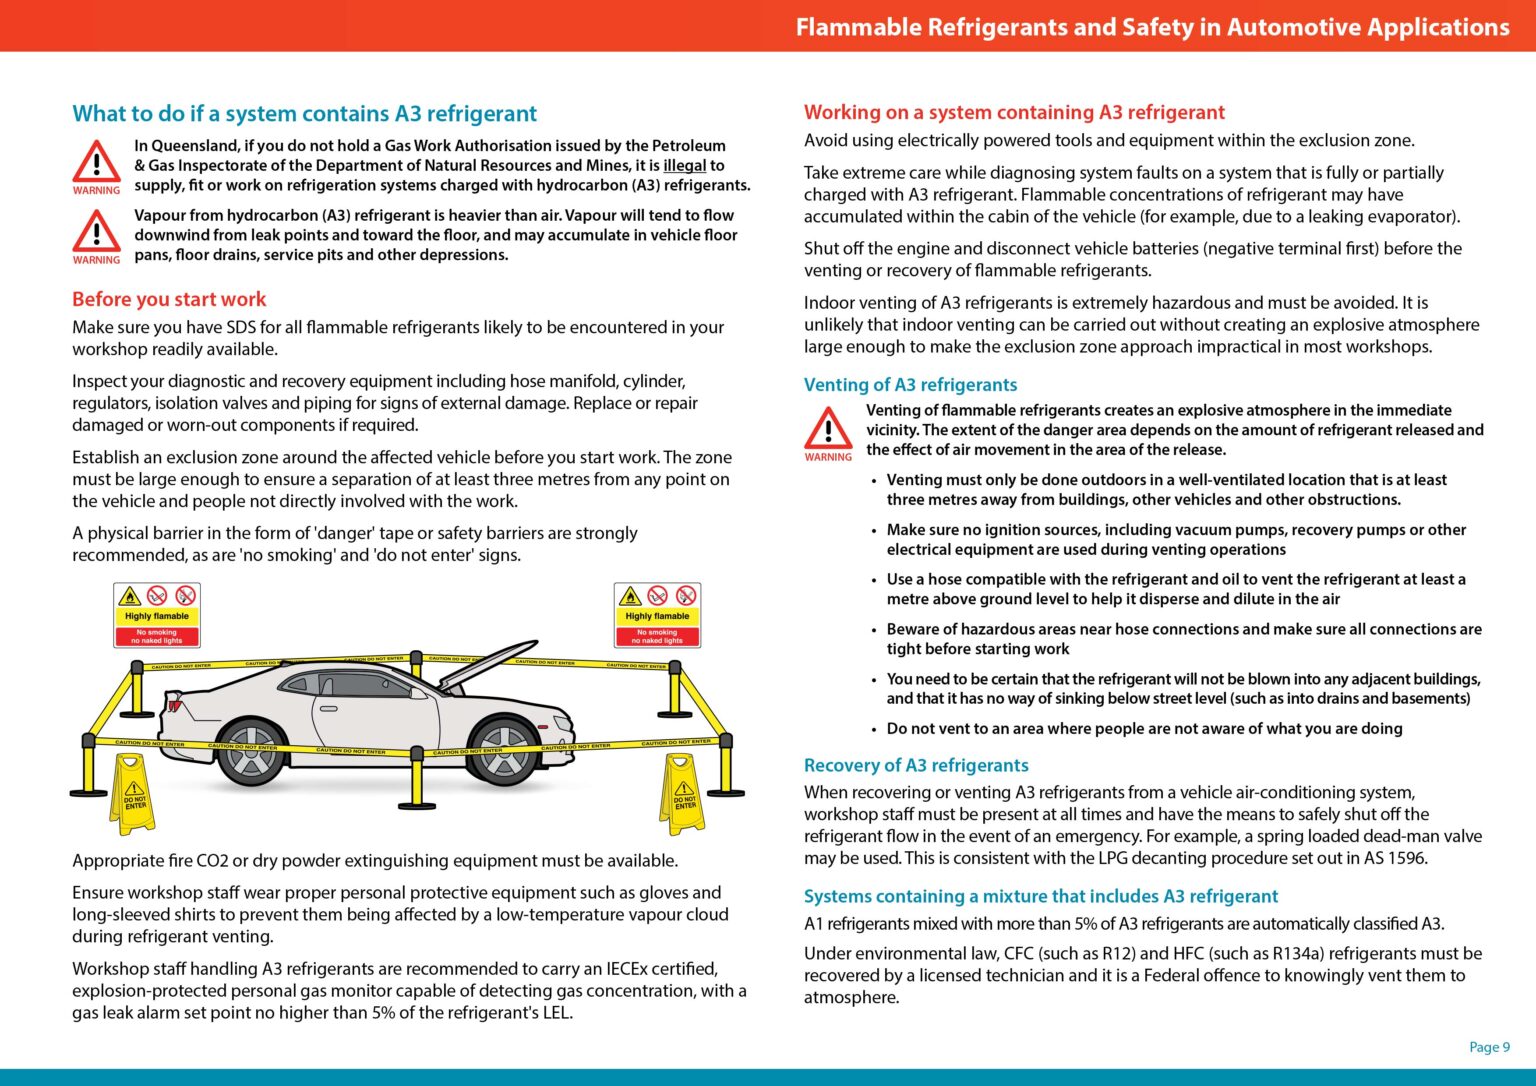 News Release Automotive Flammable Refrigerants Safety Guide Vasa